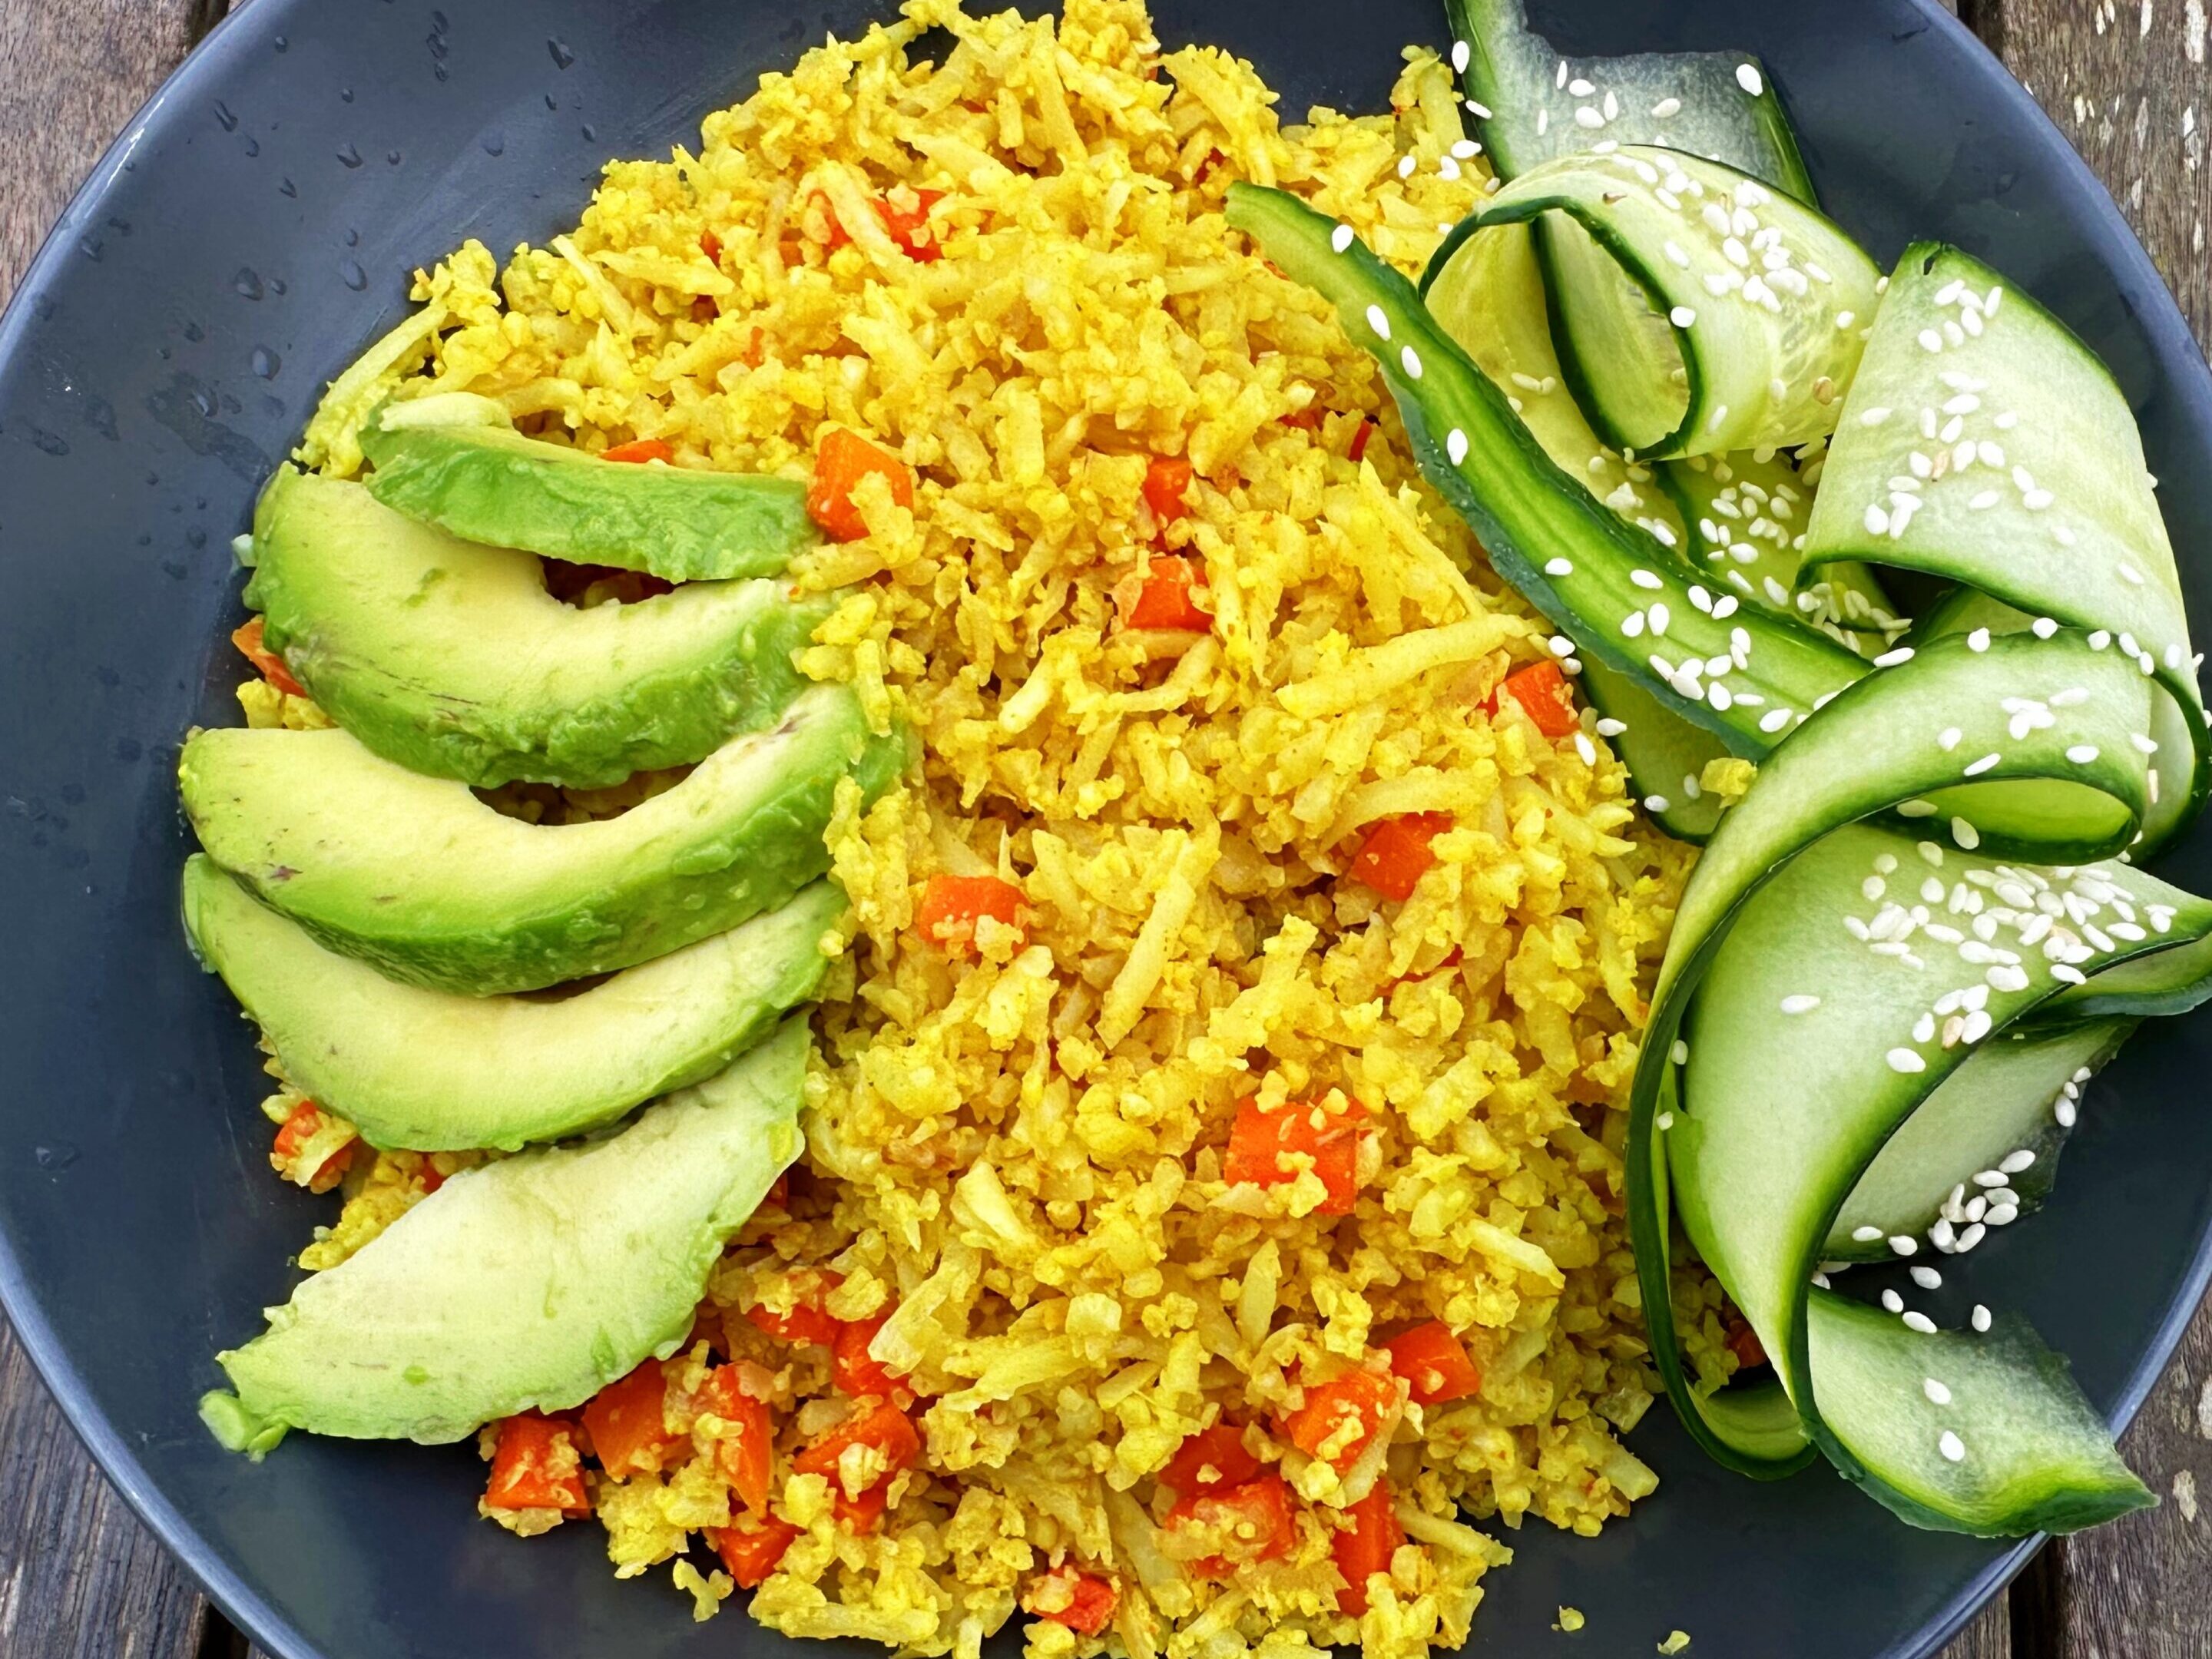 What to eat with cauliflower rice